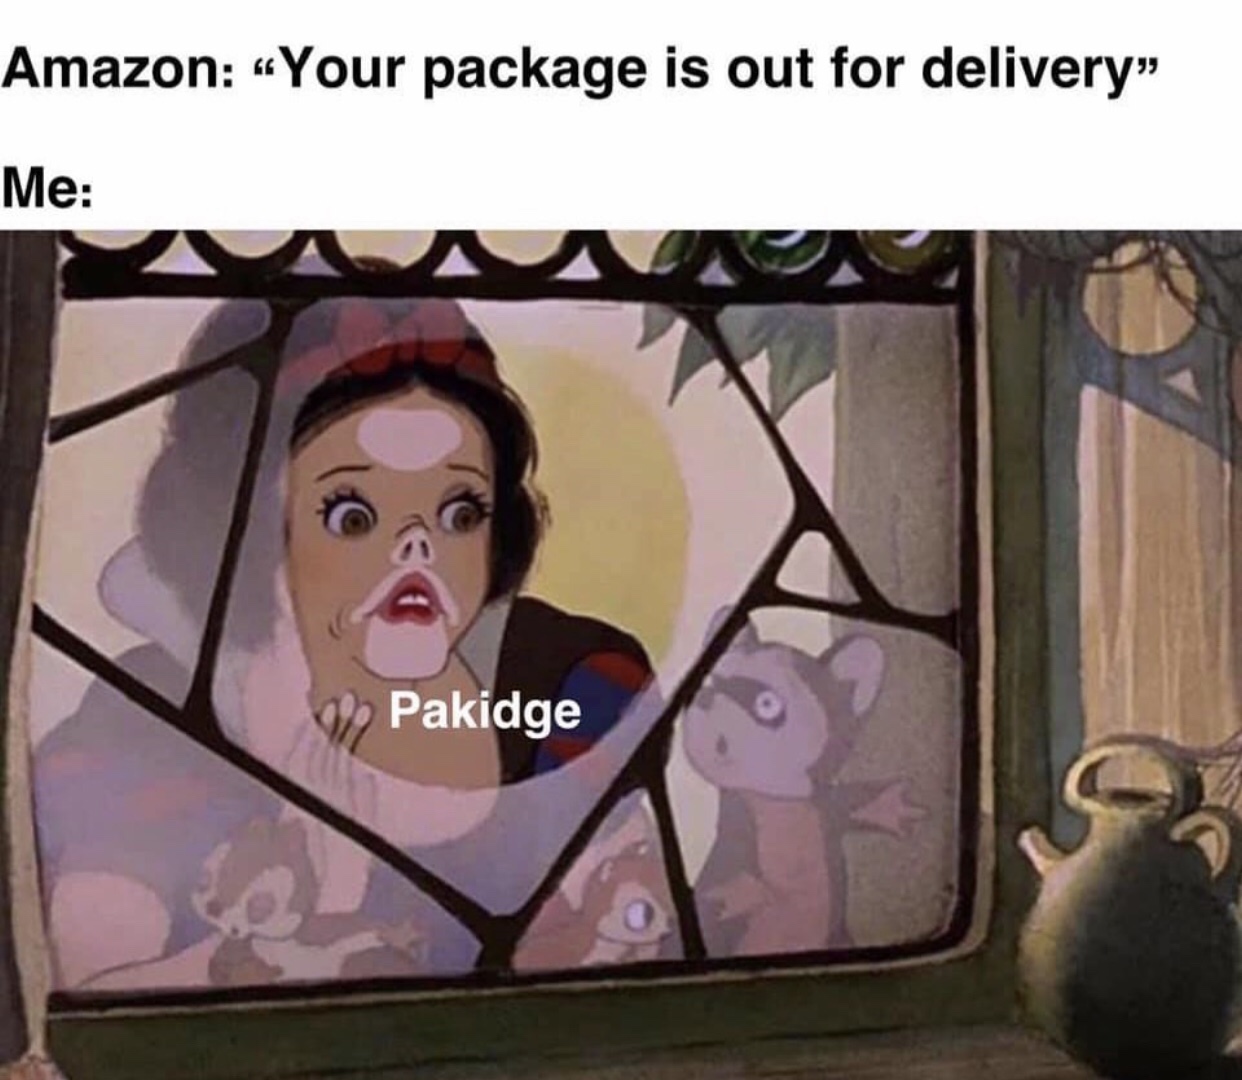 Disney meme - pakidge meme - Amazon Your package is out for delivery" Me Pakidge